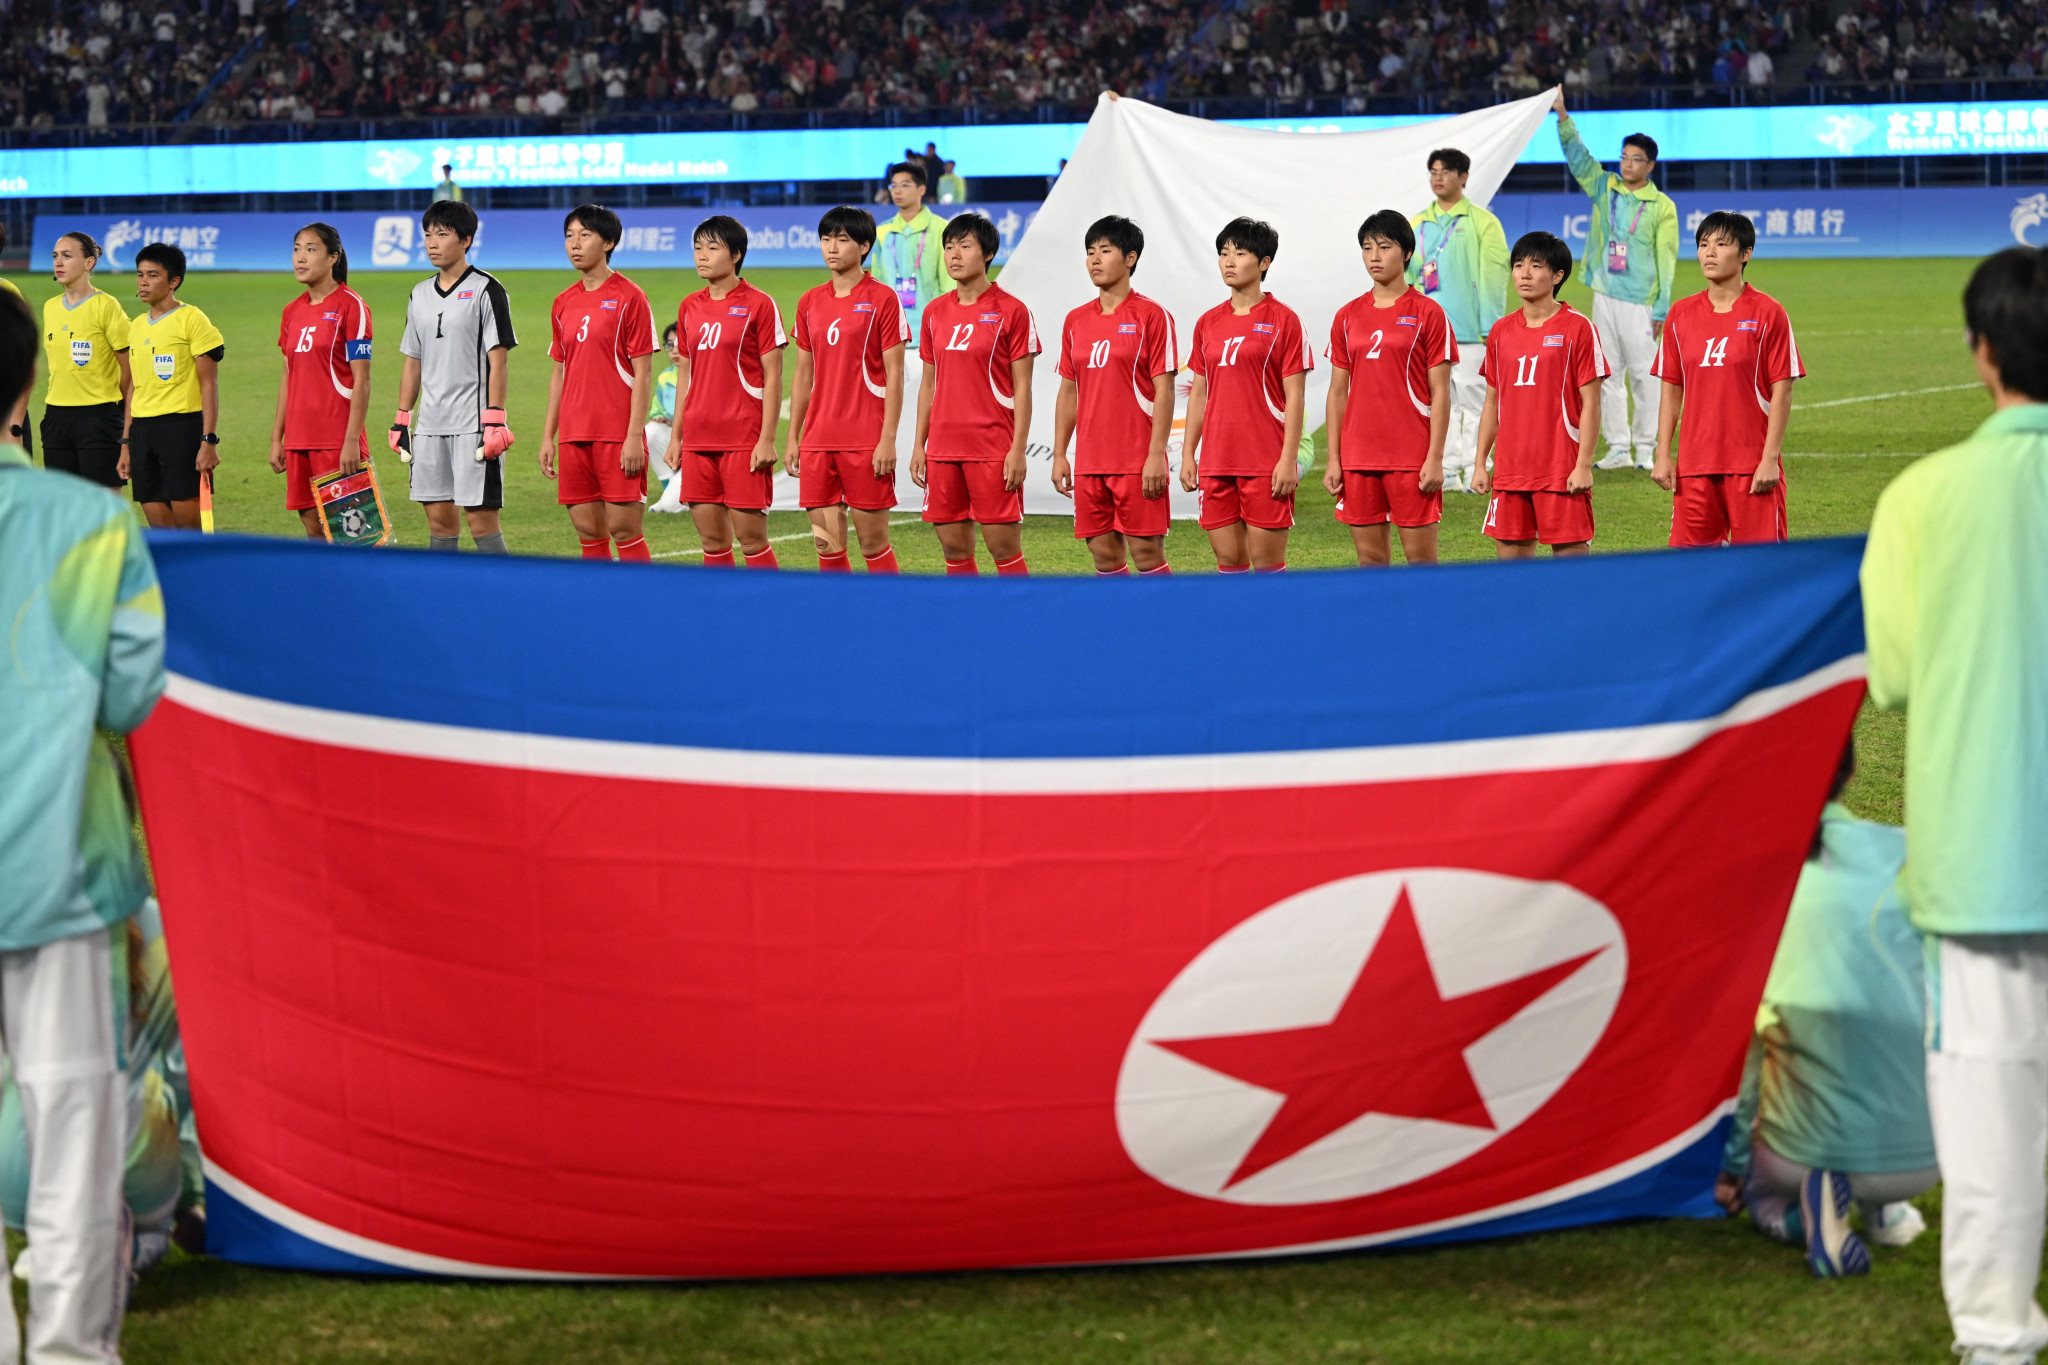 Exclusive: WADA warns OCA will face "consequences" over North Korean flag at Asian Games